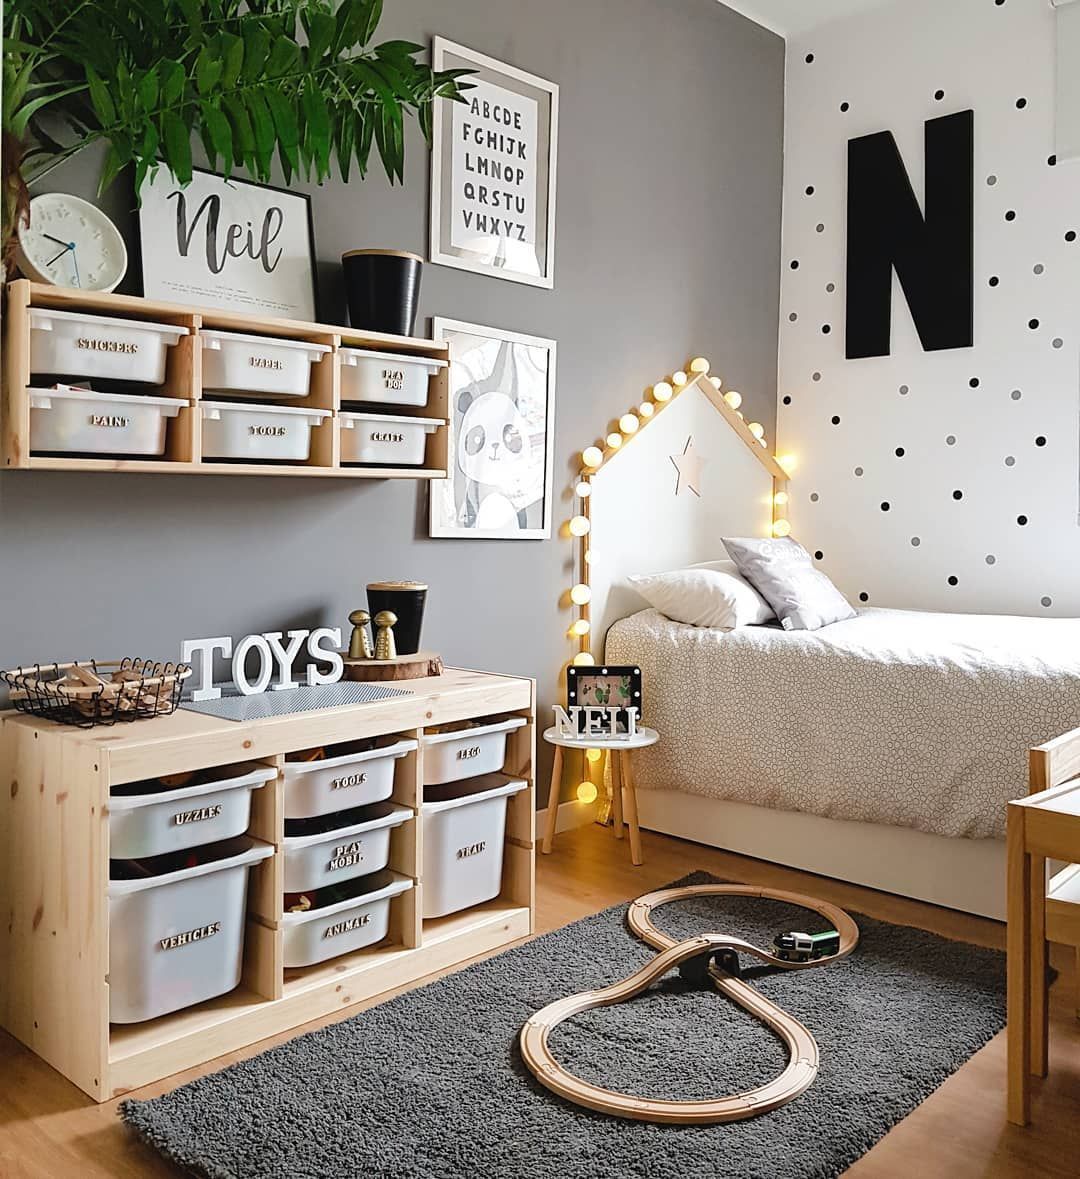 You'll Find This Children Room Design The Most Fun! -   12 room decor Kids creative ideas